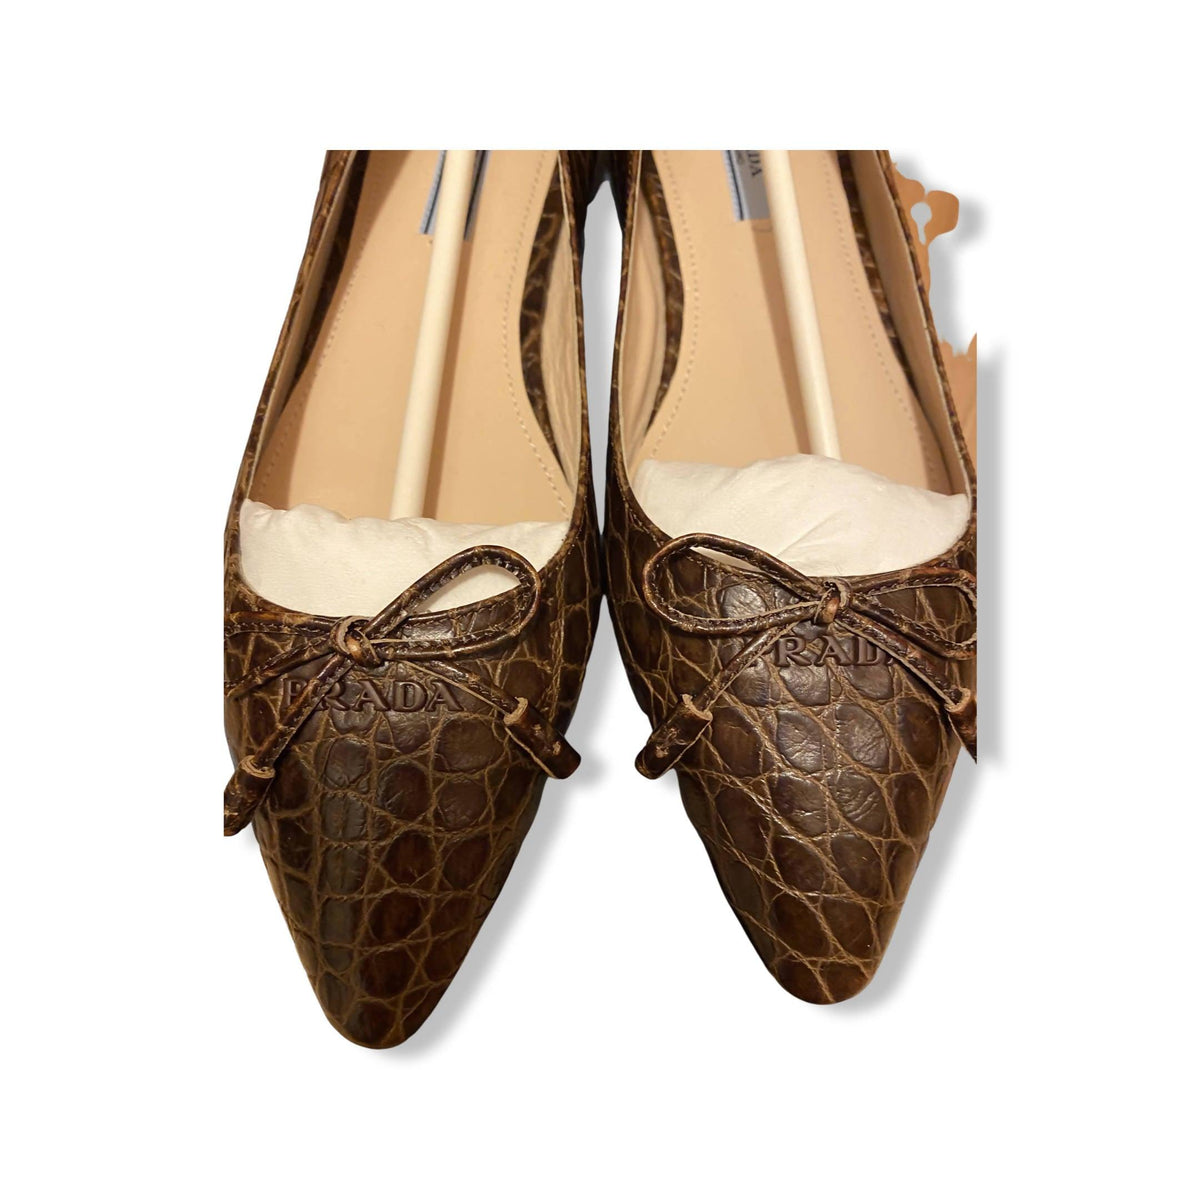 Pre-owned PRADA Brown Leather Pointed-Toe Flats | Size US 6 - EU 36 - theREMODA